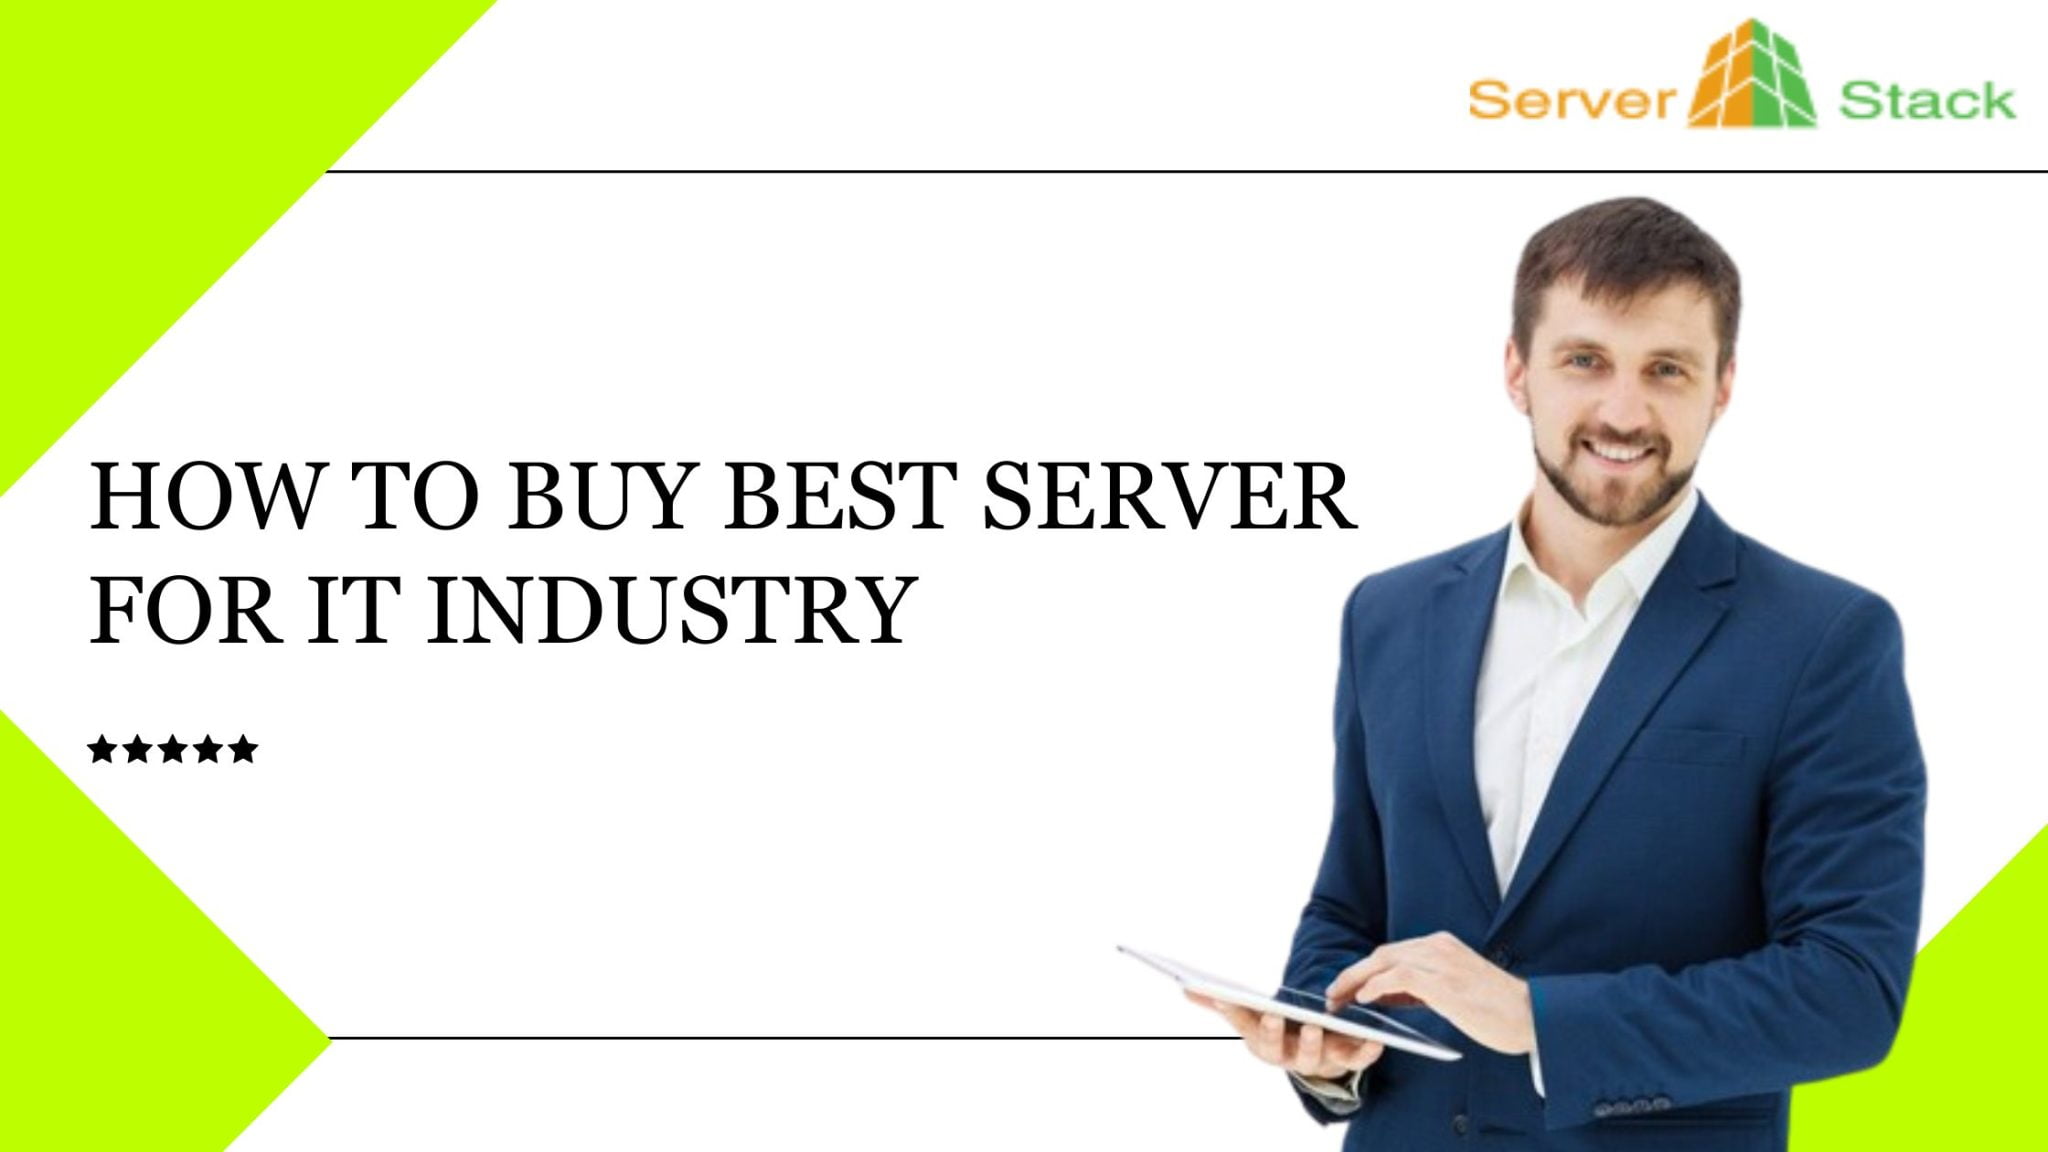 The first step in choosing the best server for the IT industry is to assess your specific IT requirements.